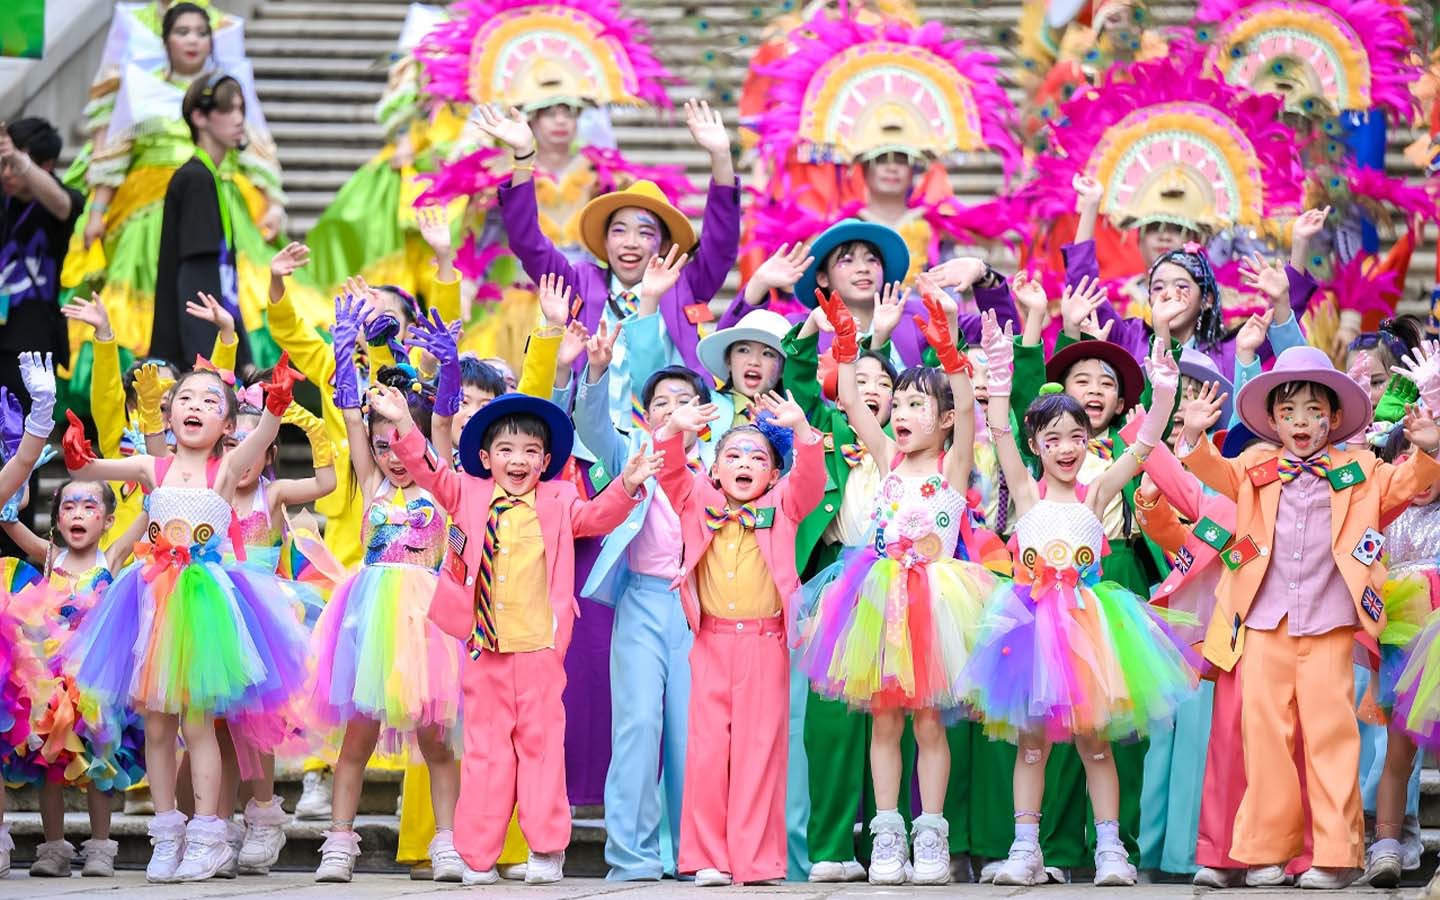 More than 1,800 performers march in this year’s International Parade